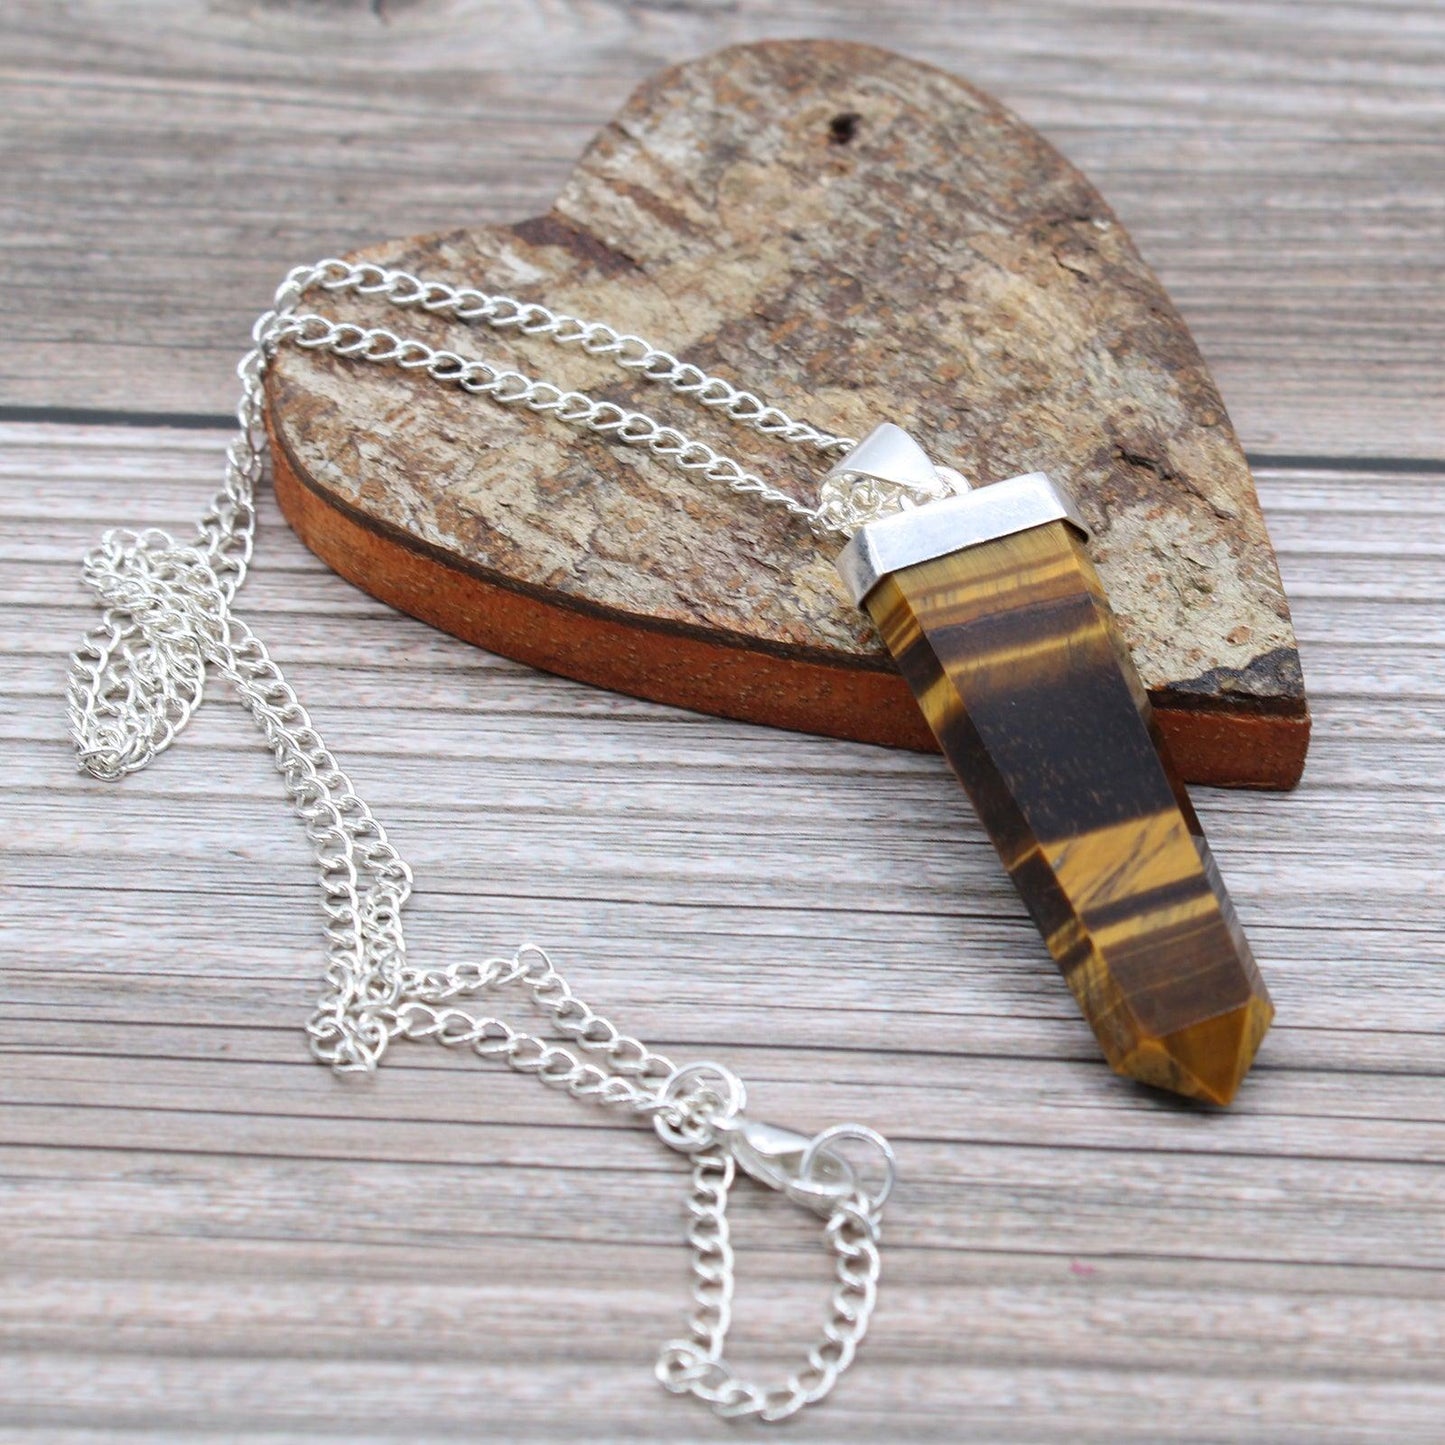 Gemstone Flat Pencil Pendant Necklace - Tigers Eye - Free Pouch